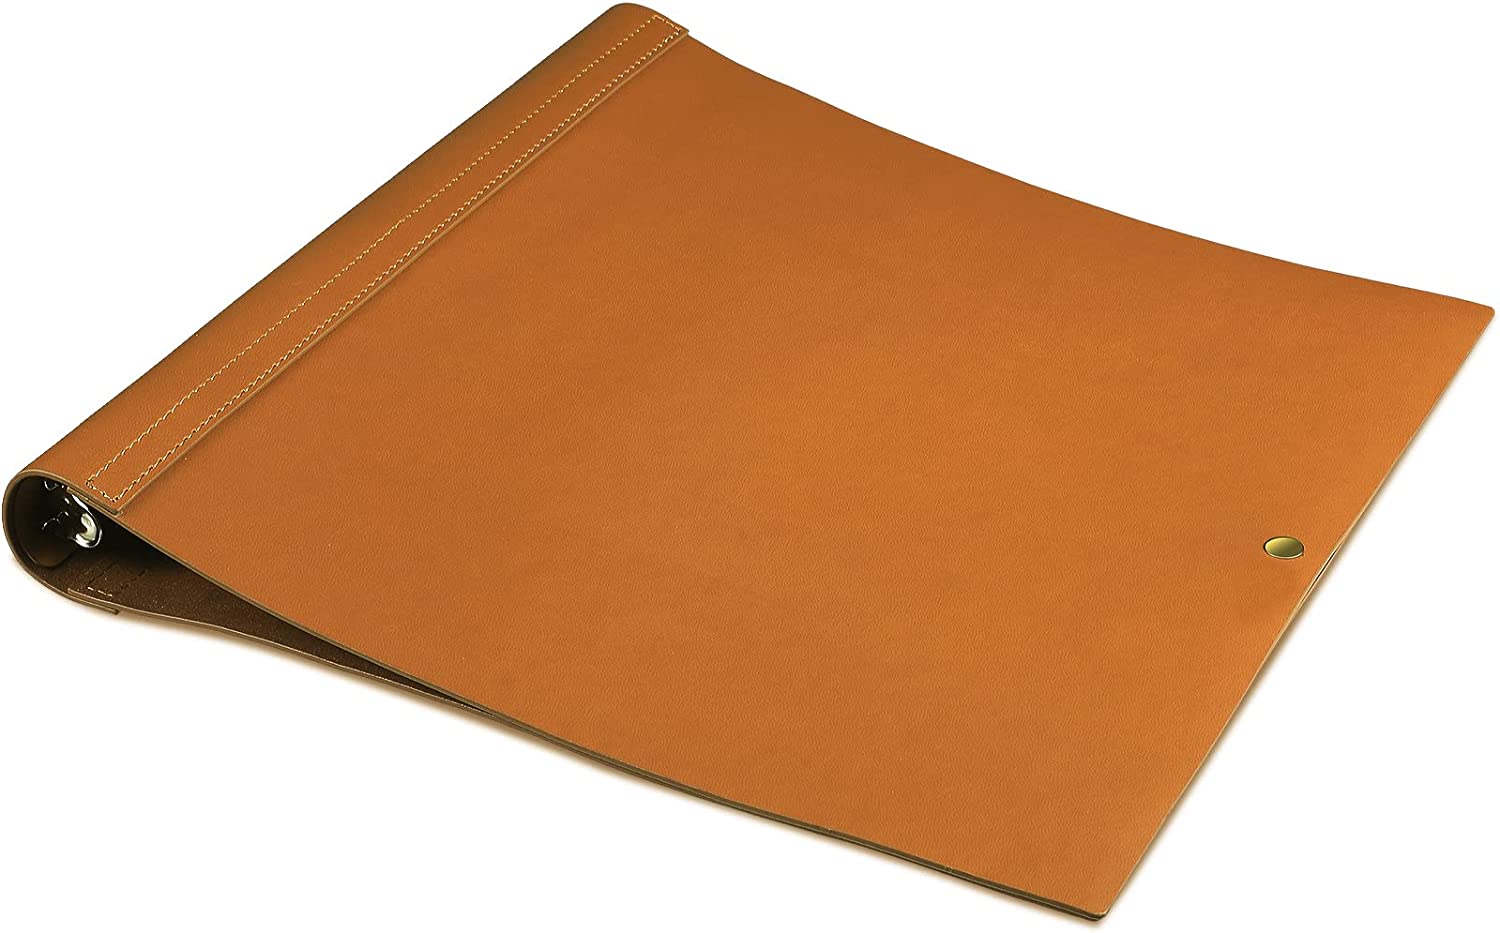 Forevermore 1.5 inch 3 Ring Binder Portfolio with Zippered Closure and Brown